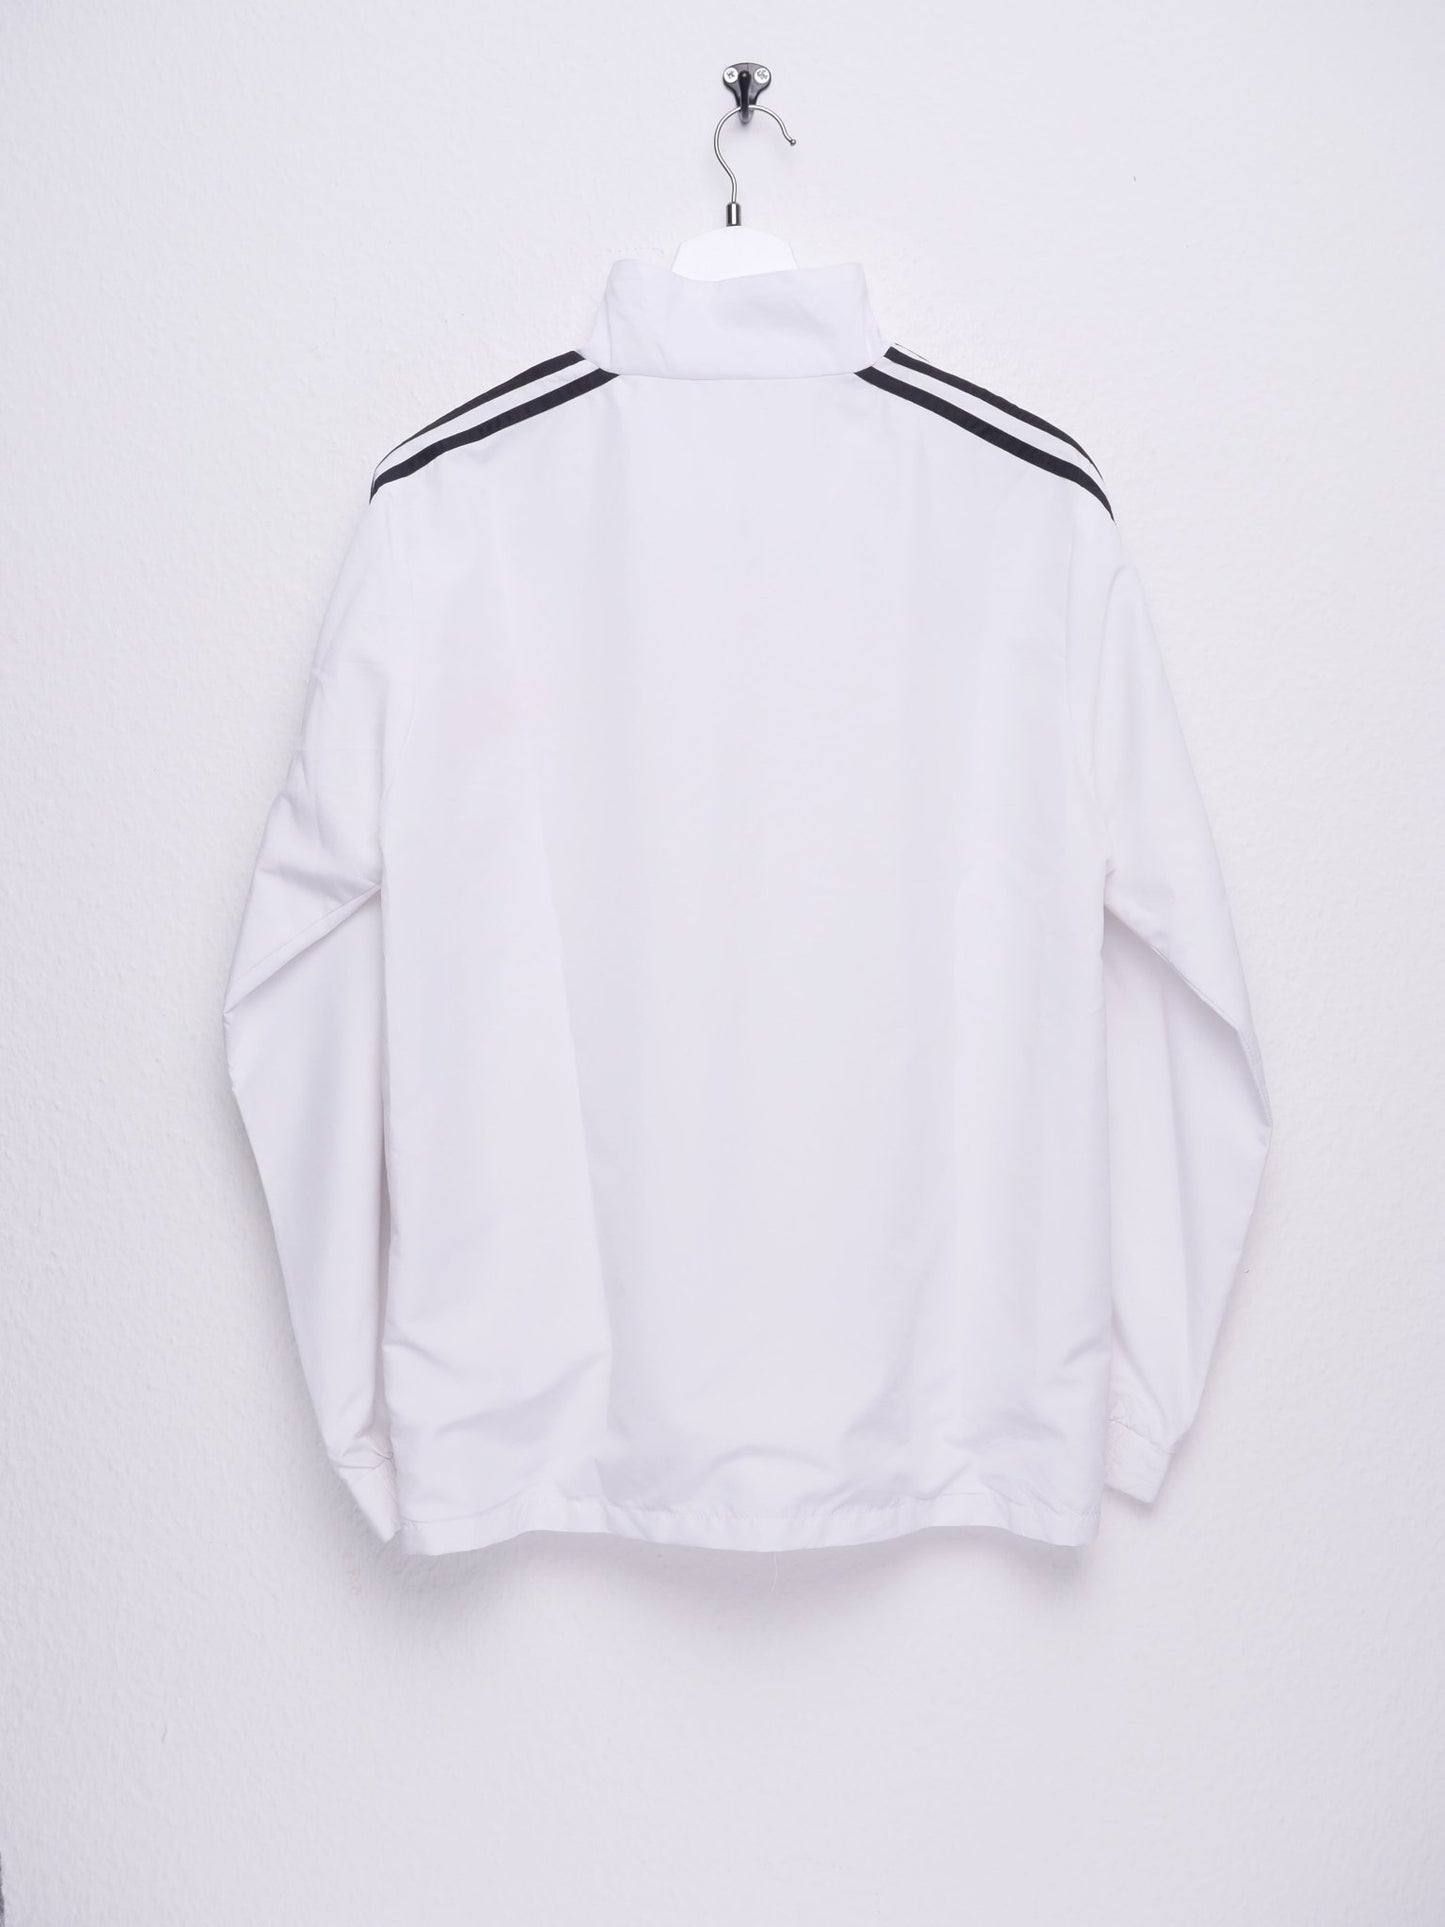 Adidas embroidered Logo two toned Soccer Track Jacket - Peeces